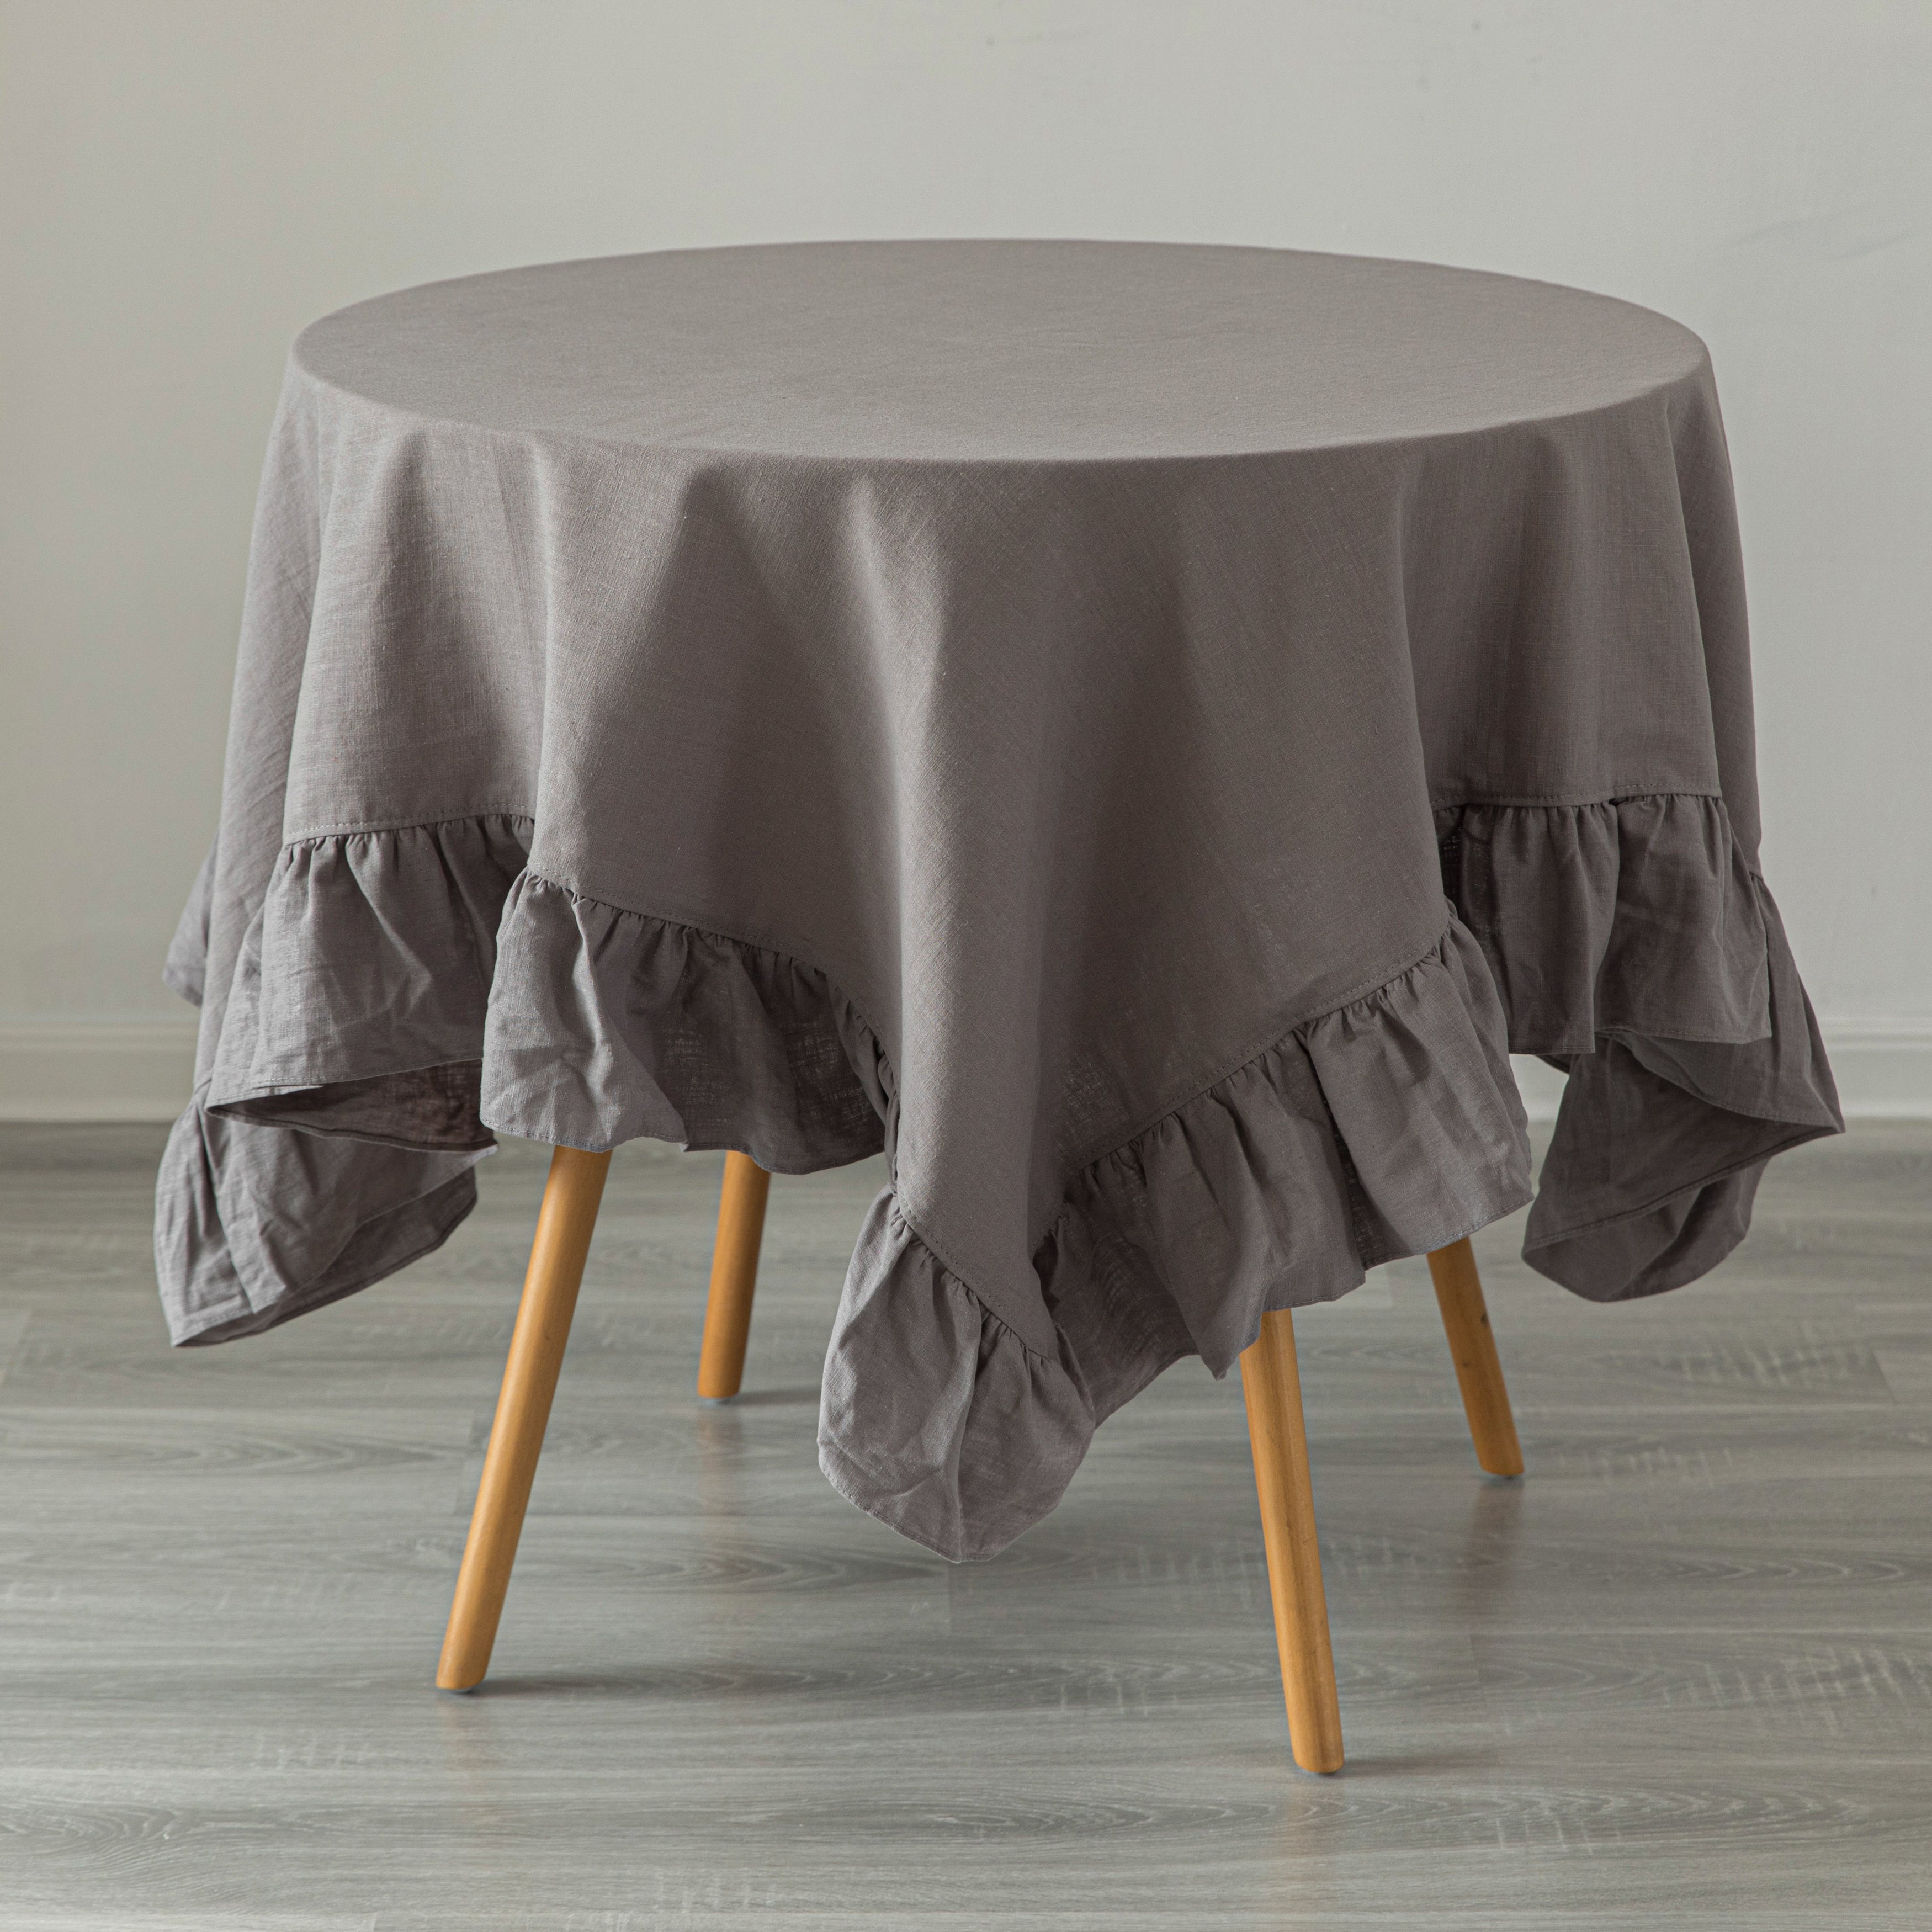 Deerlux 100 Percent Pure Linen Washable Tablecloth With Ruffle Trim - 60 X 60 In. Gray